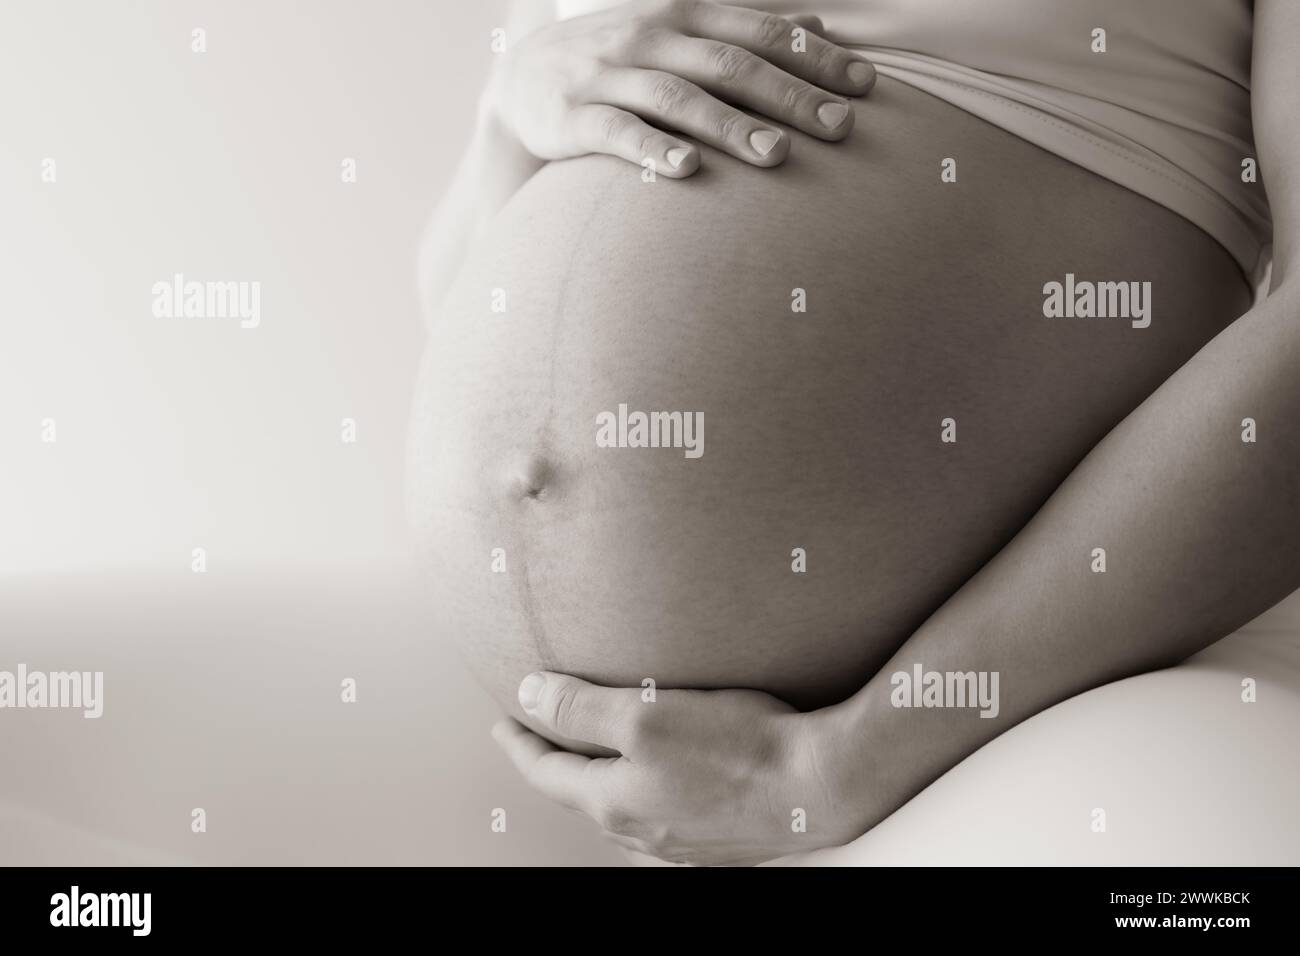 Description: Midsection of a woman sitting and gently holding her very round pregnant baby bump. Side view. White background. Bright shot. Sepia. Stock Photo